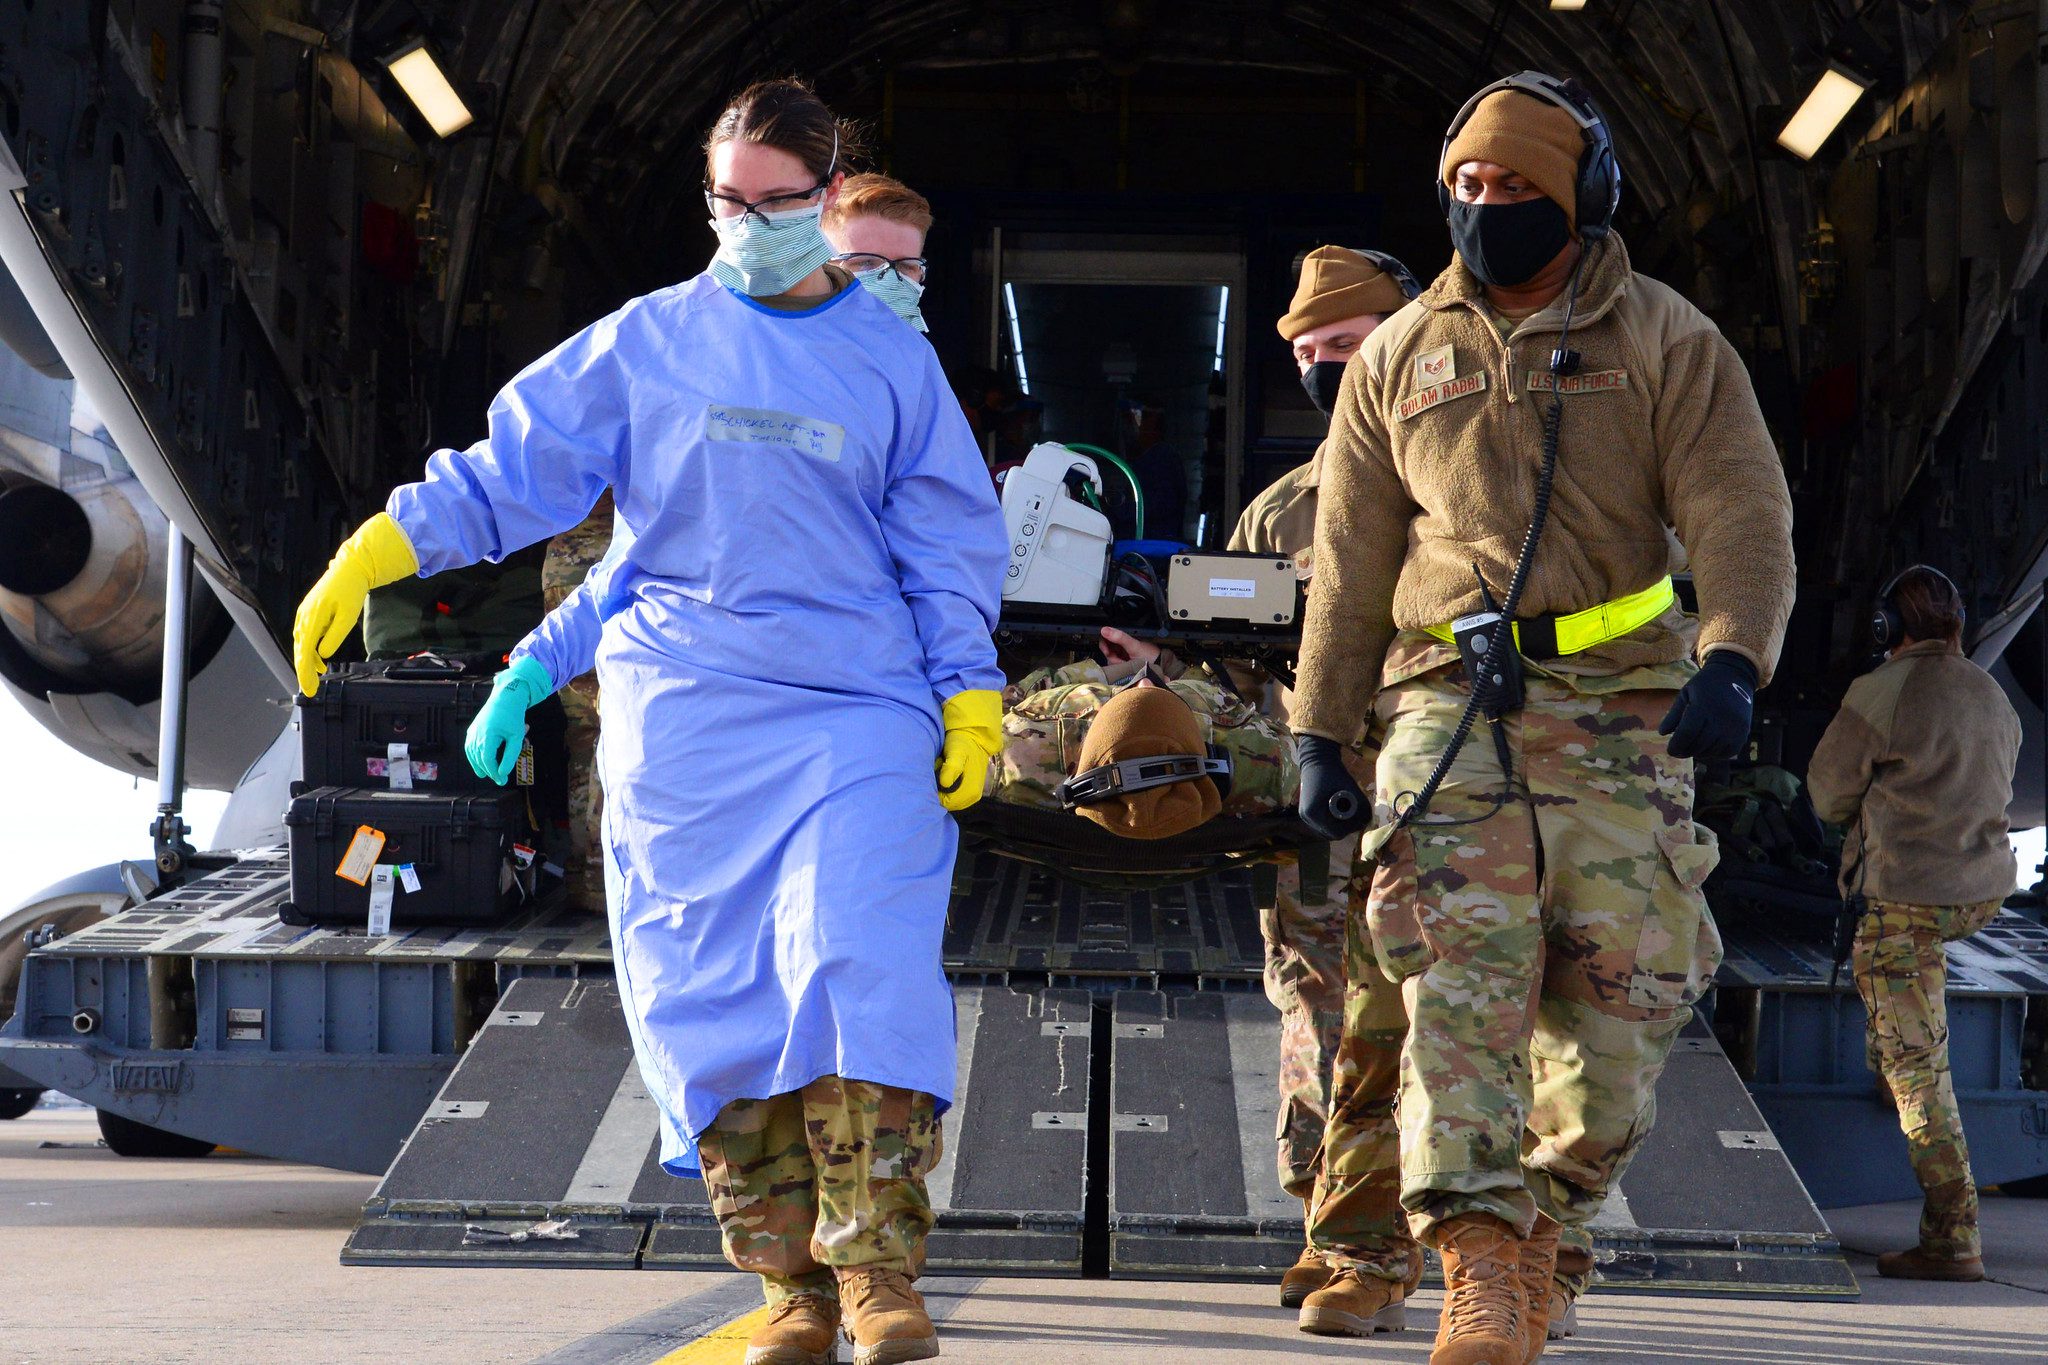 Airmen assigned to the 10th Expeditionary Aeromedical Evacuation Flight unload a litter with a simulated patient from a C-17 Globemaster III aircraft during training at Ramstein Air Base, Germany, on Jan. 26, 2021.